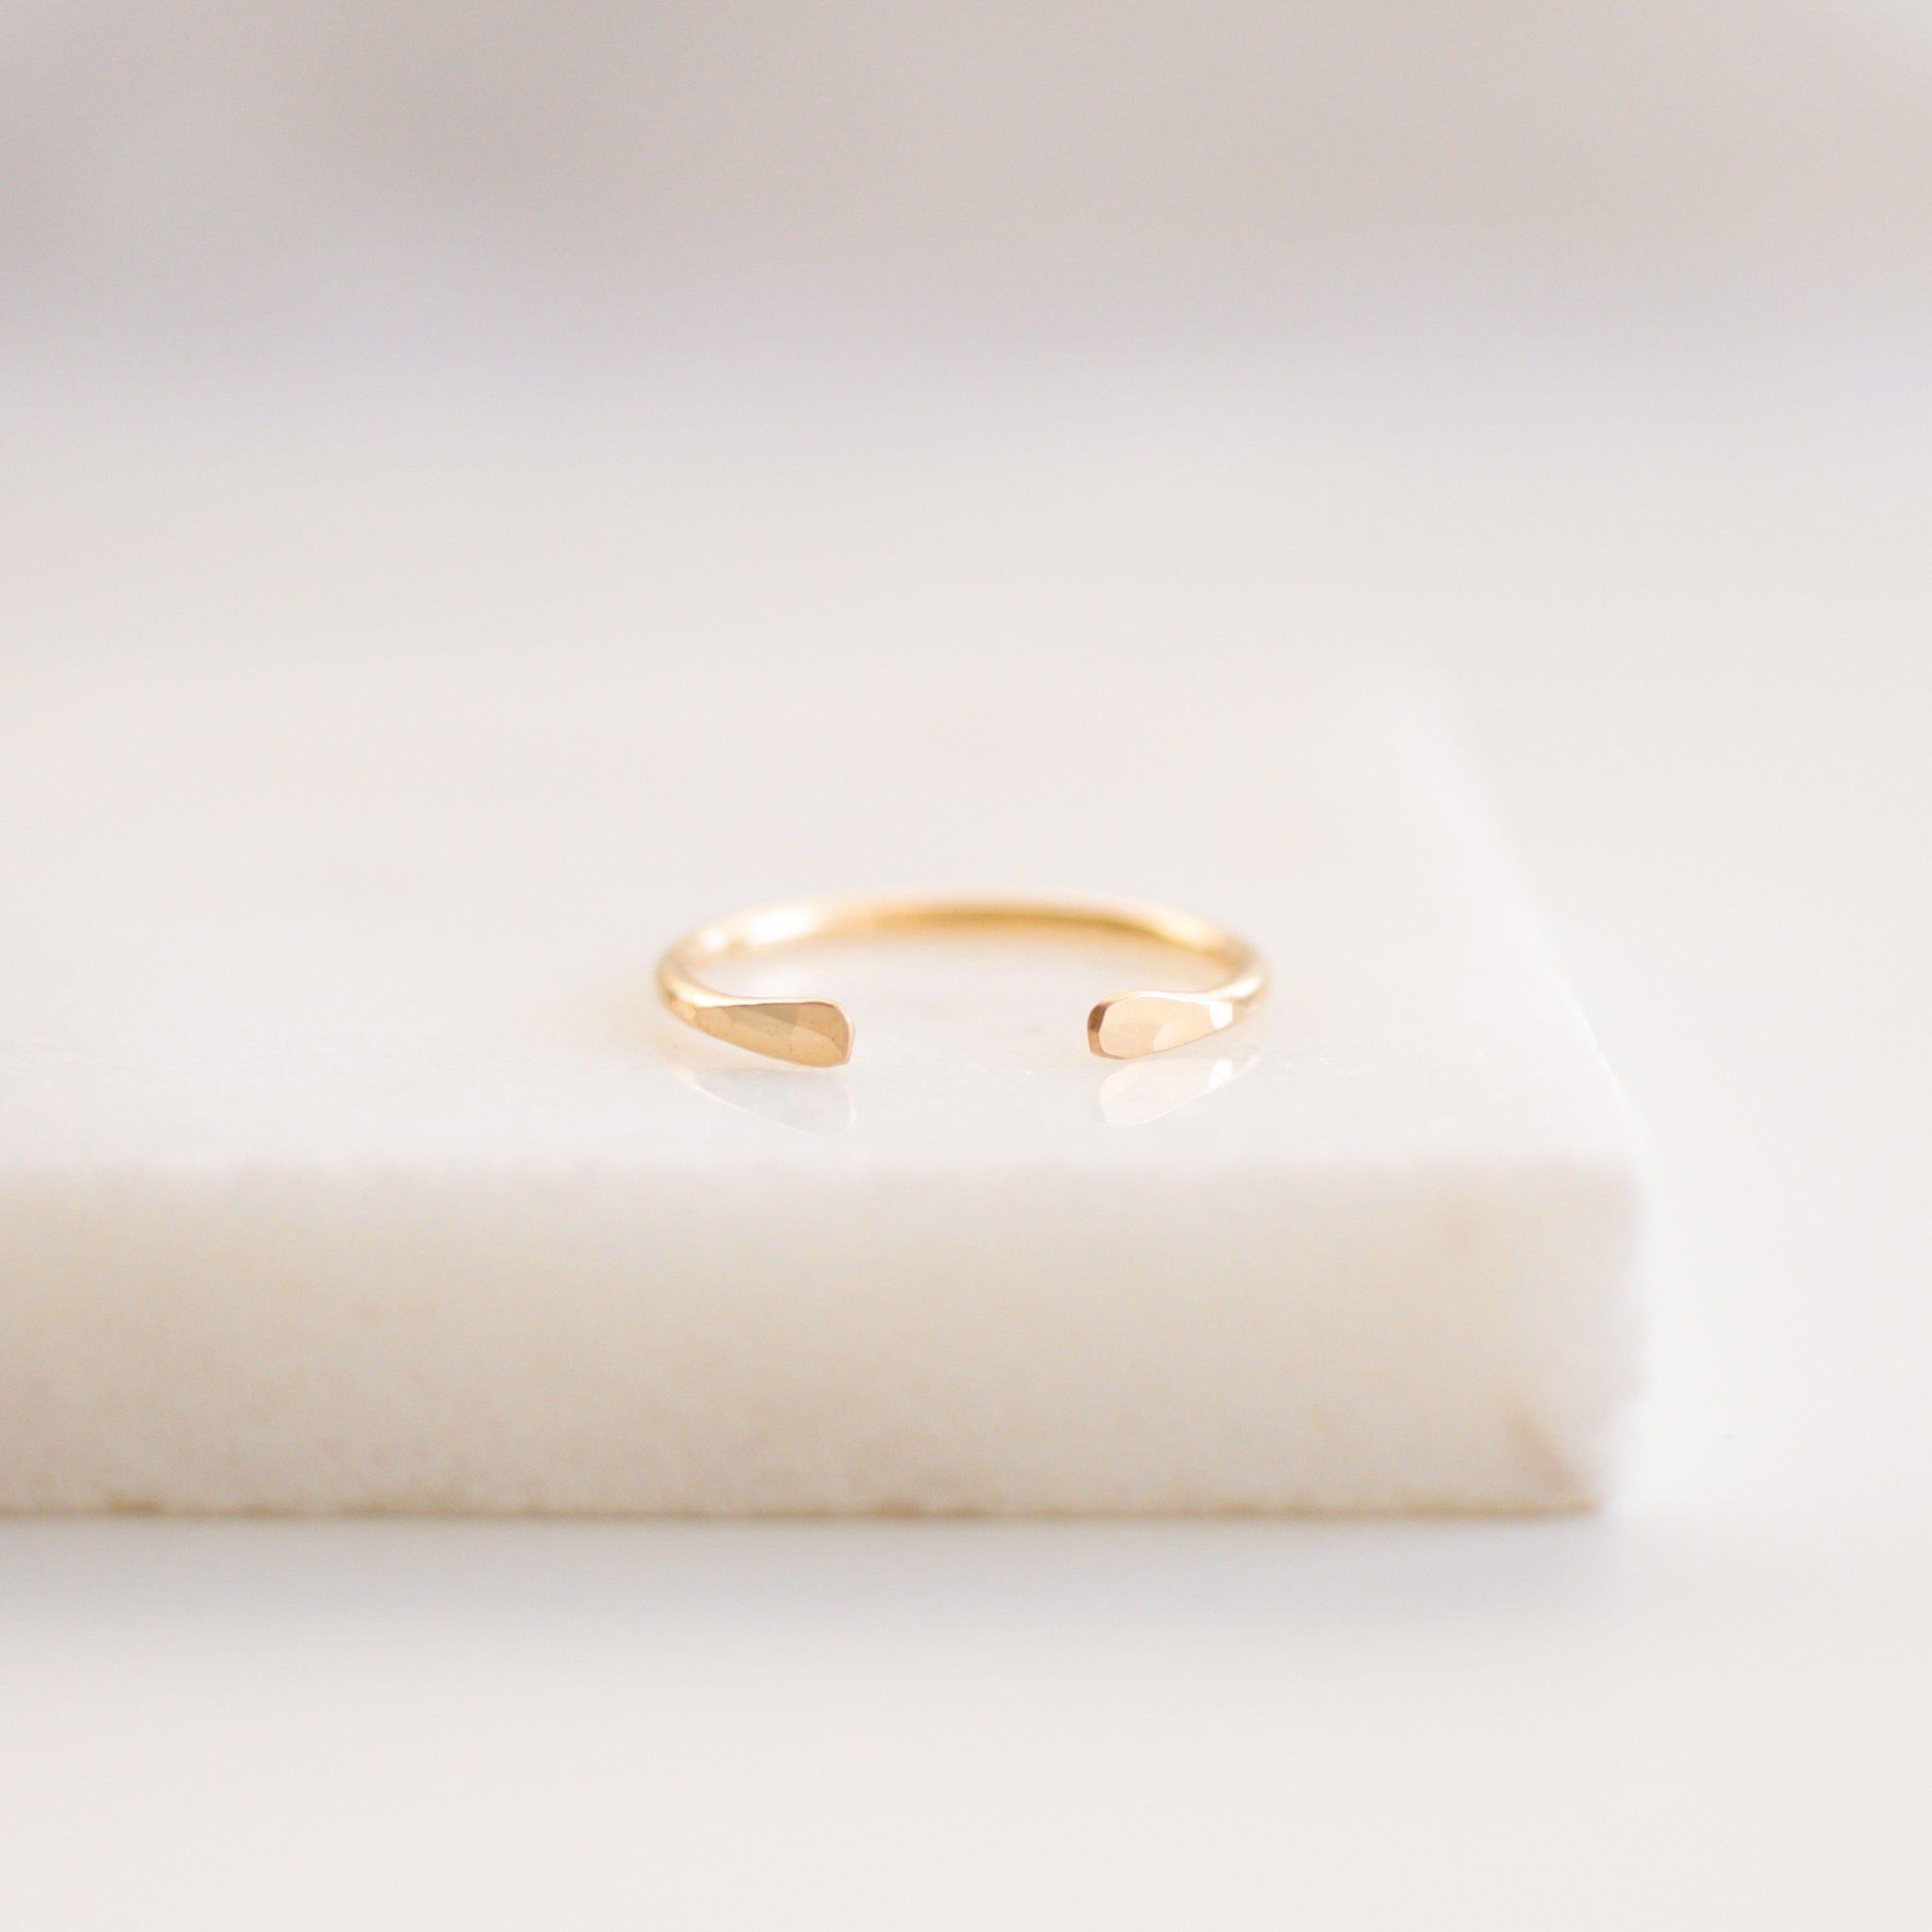 Cuff Ring - Nolia Jewelry - Meaningful + Sustainably Handcrafted Jewelry